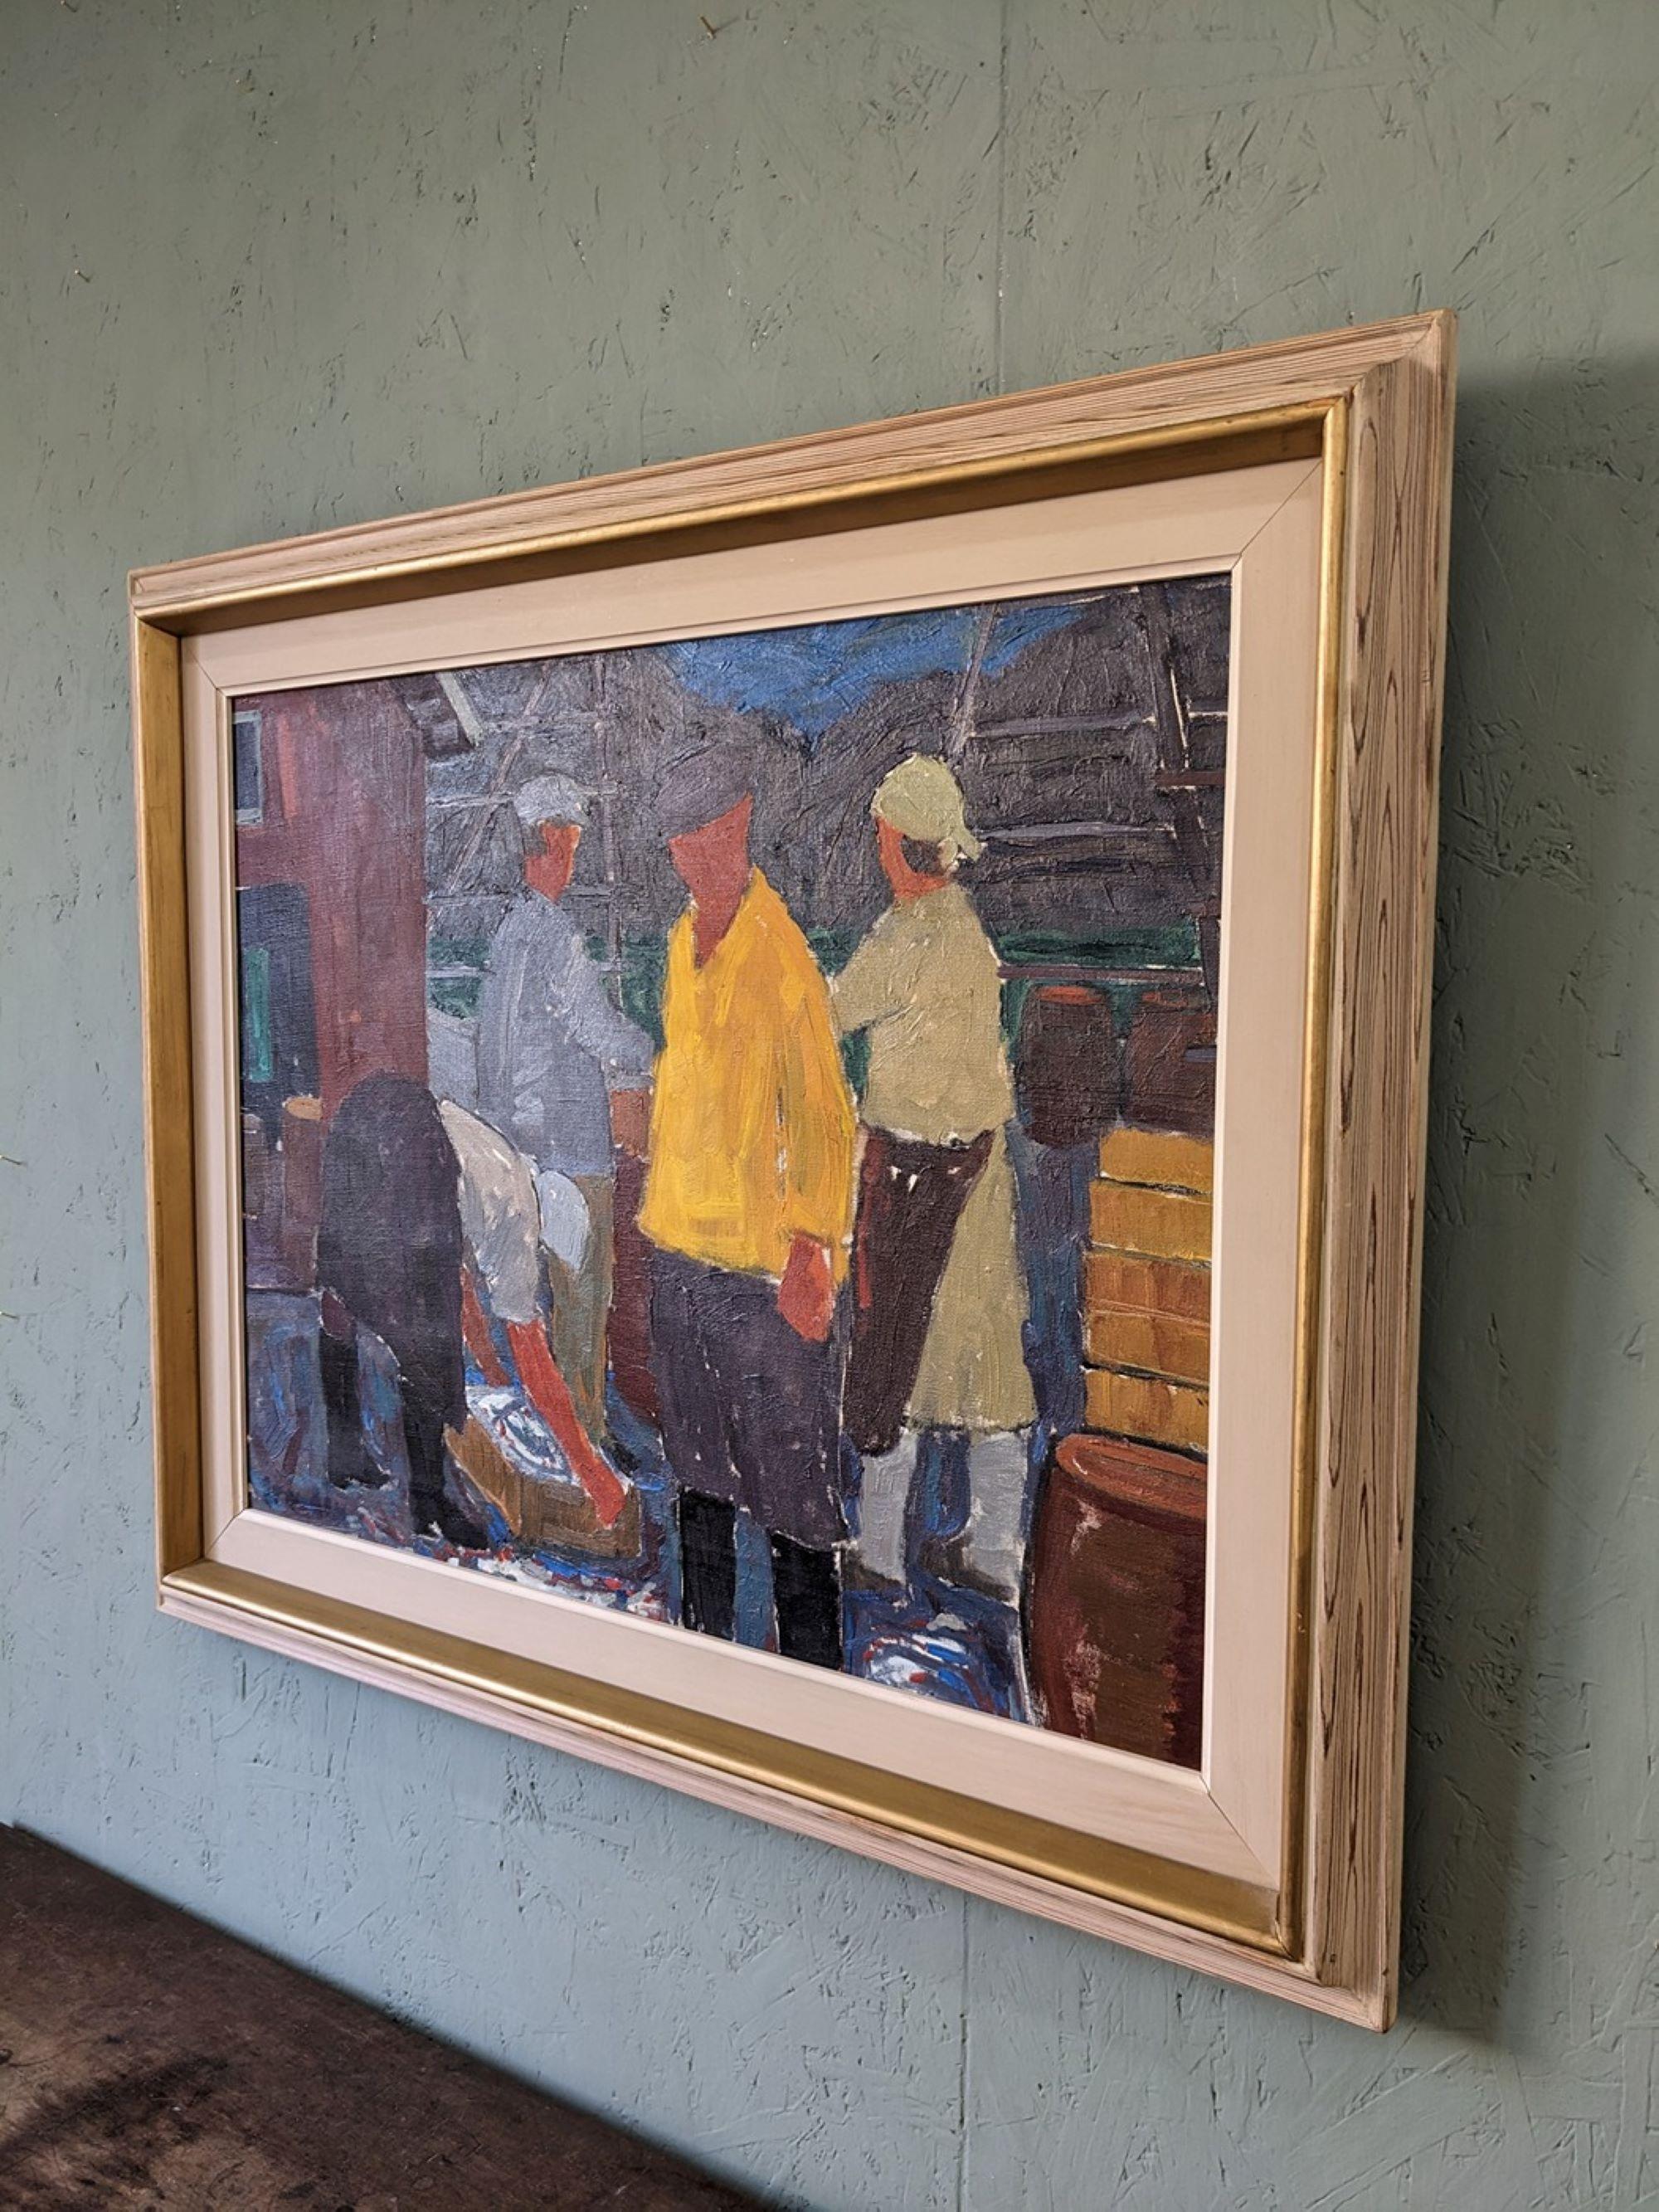 COASTAL CATCH
Size: 55 x 69 cm (including frame)
Oil on canvas

A vibrant and lively mid-century narrative painting, executed in oil onto canvas.

At the center of the painting, a group of 4 figures are portrayed beside a coast and a hut. They are